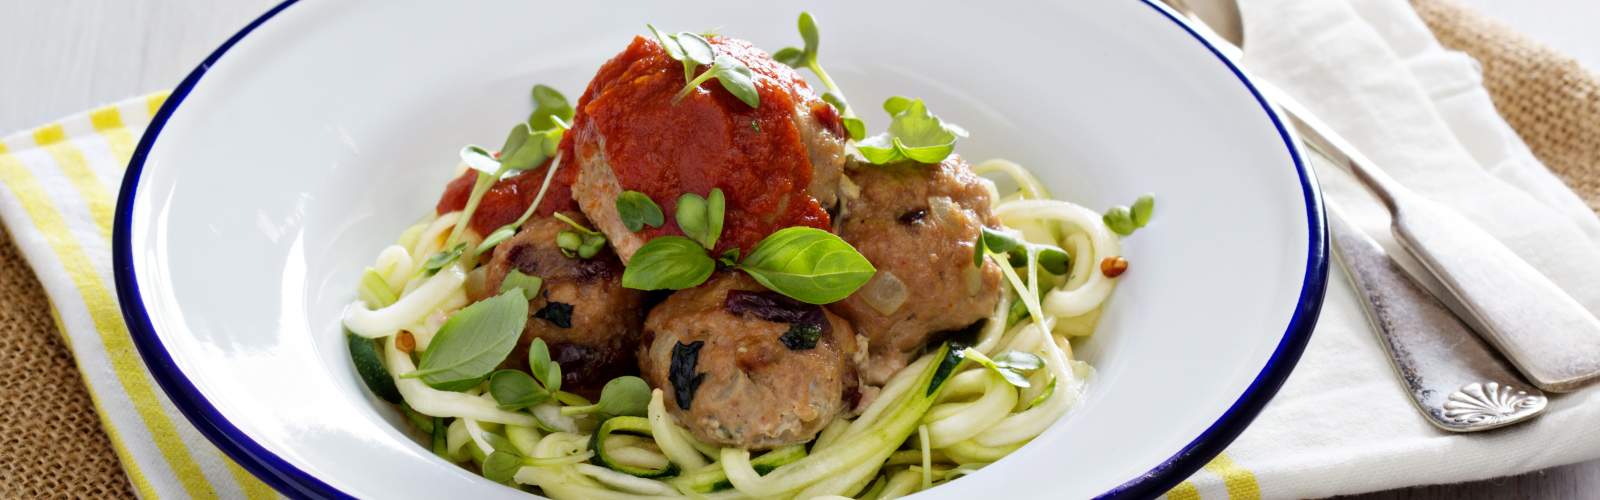 Turkey Meatball with Rao's Sauce and Zucchini Noodles